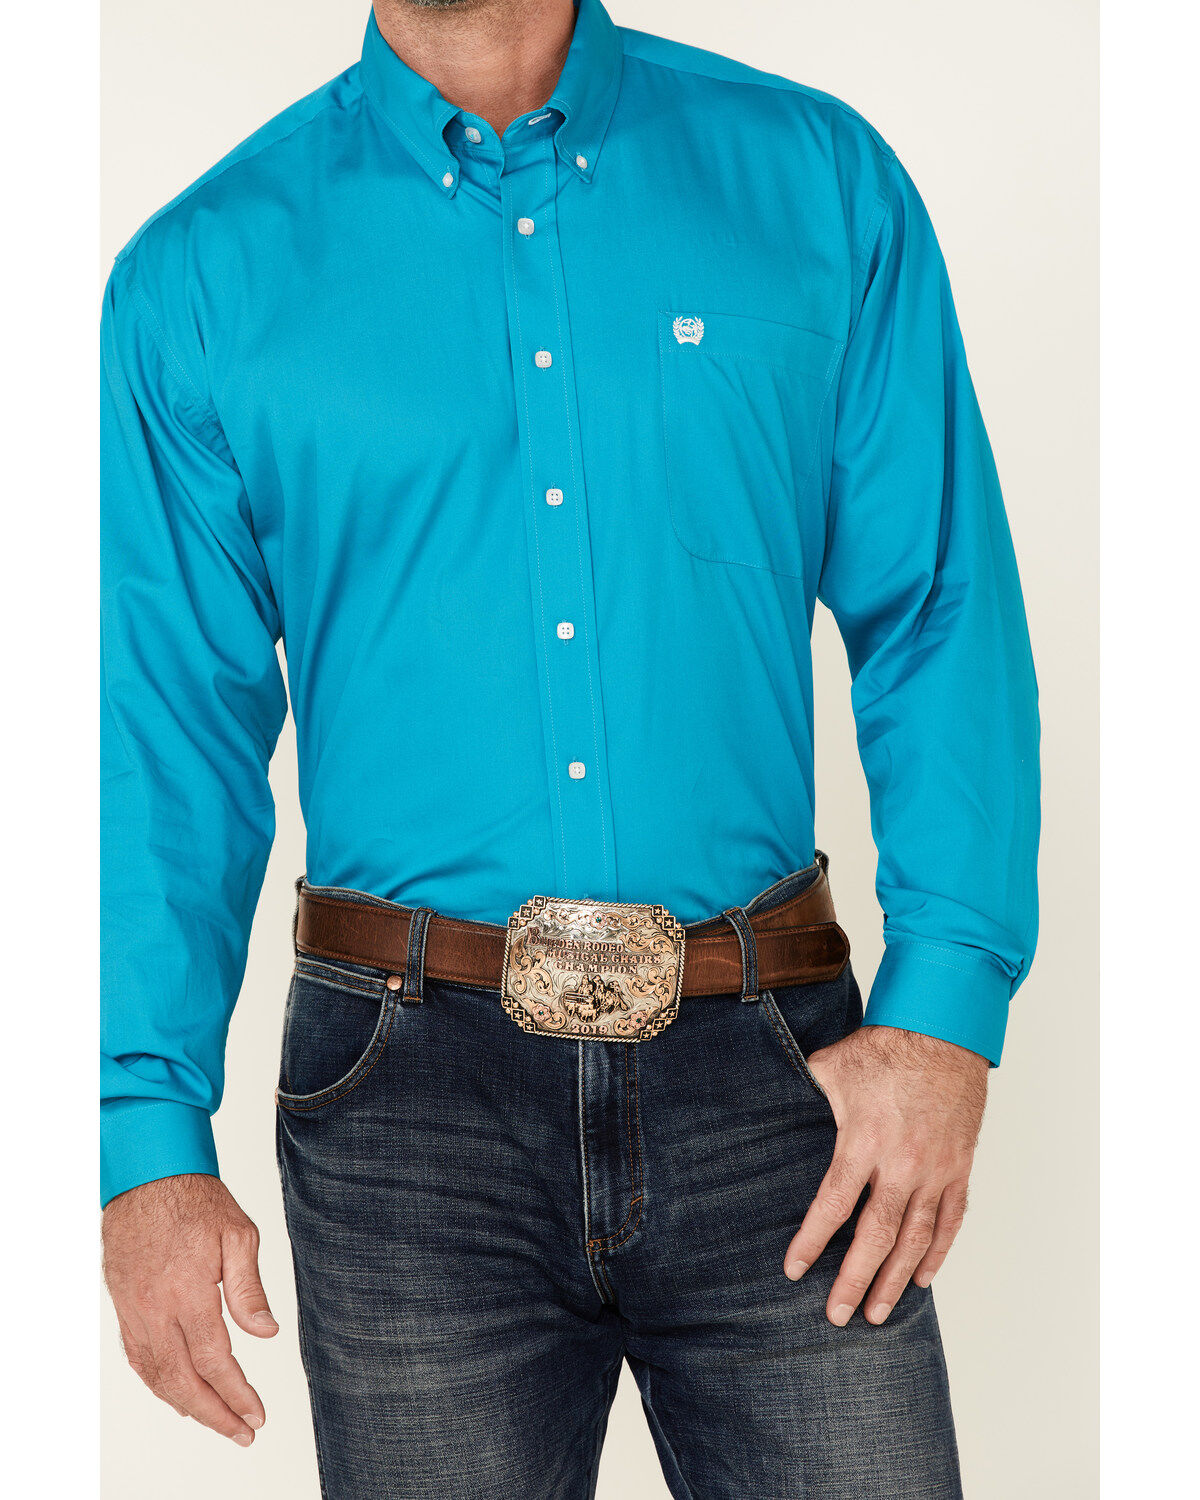 Cinch Men's Solid Turquoise Button-Down ...